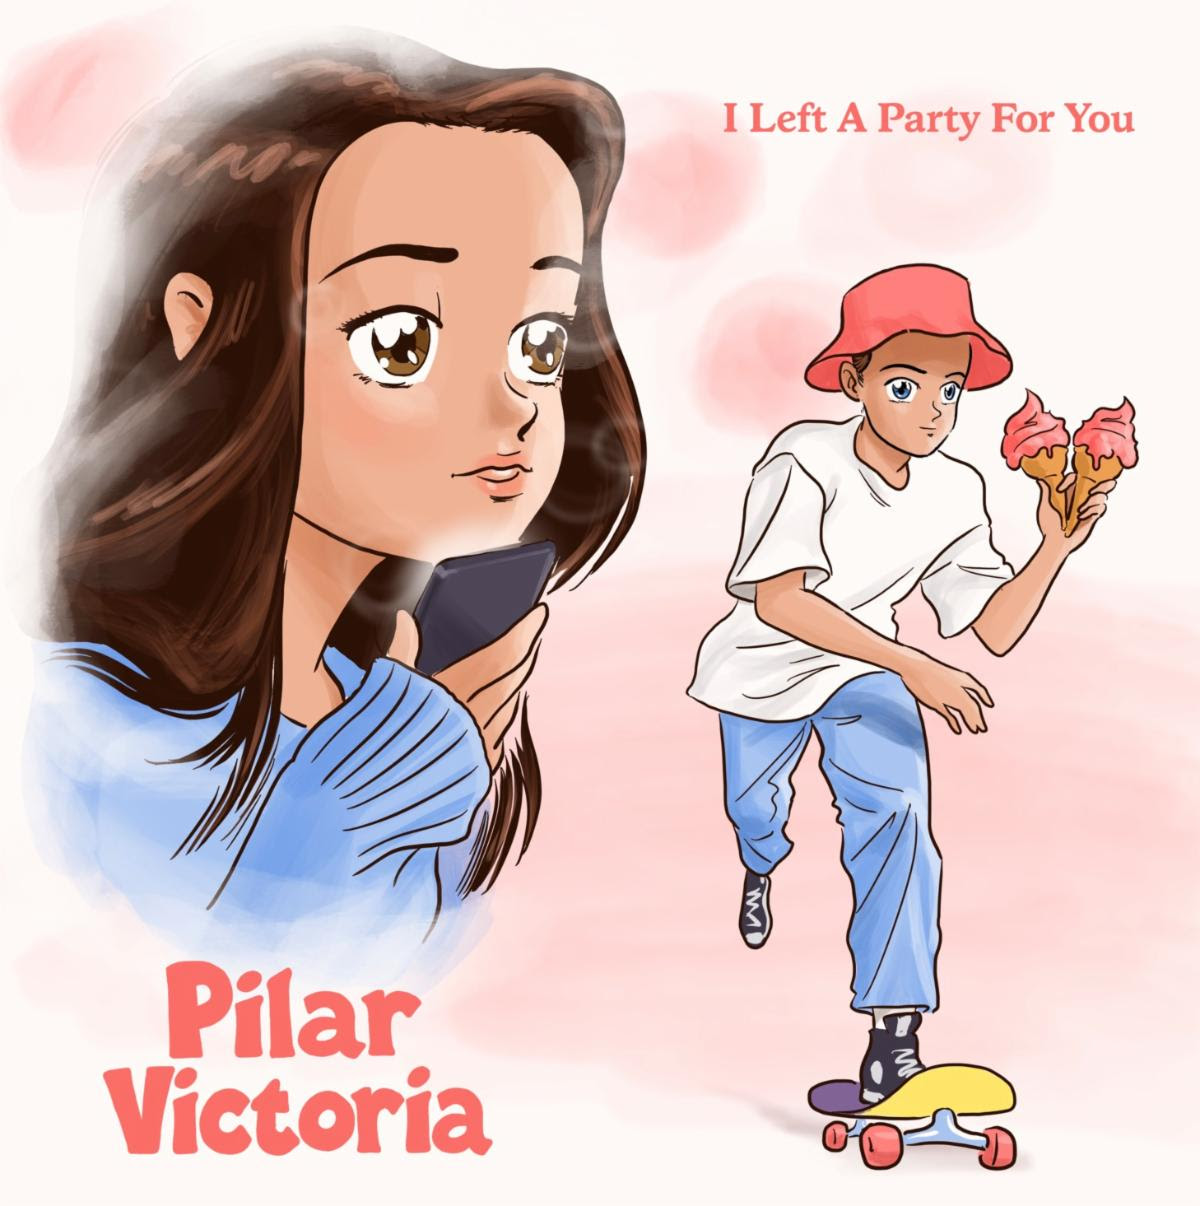 I Left a Party for You - Pilar Victoria